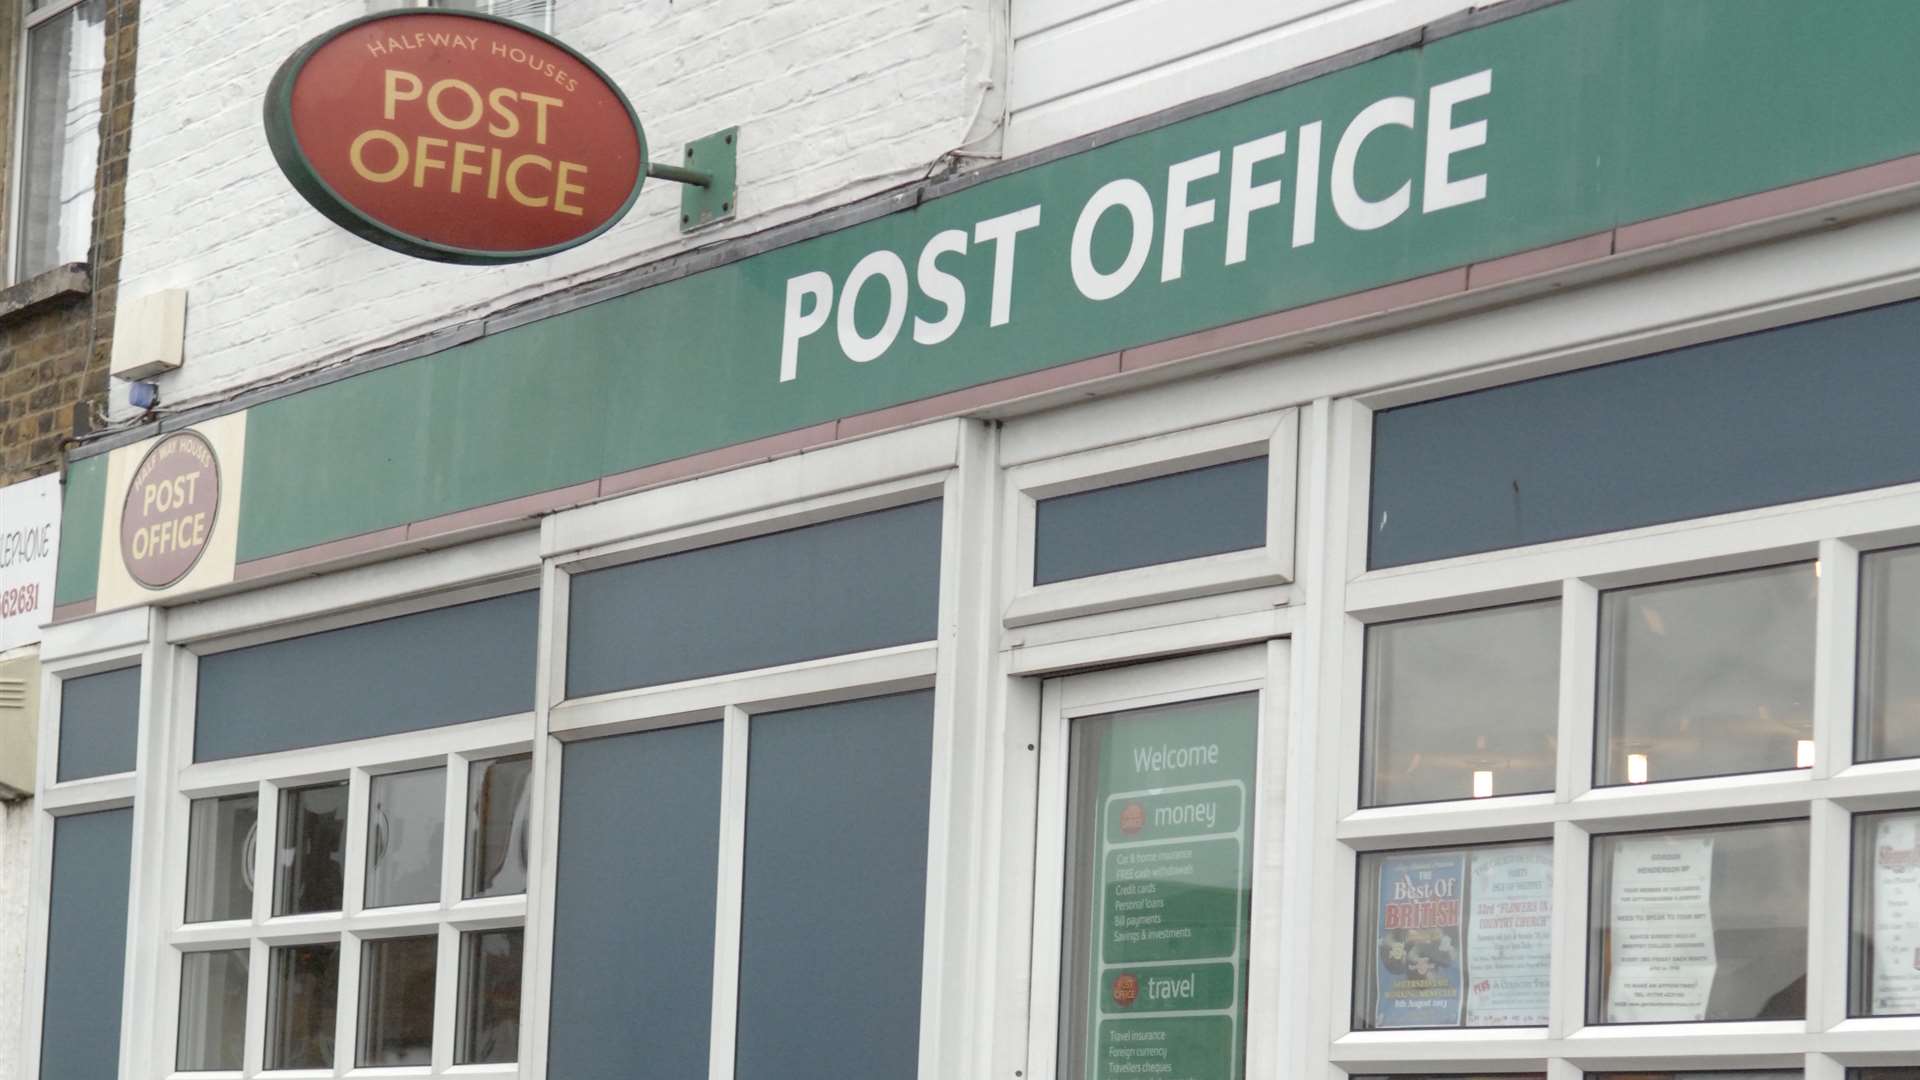 A post office from the outside. Library picture